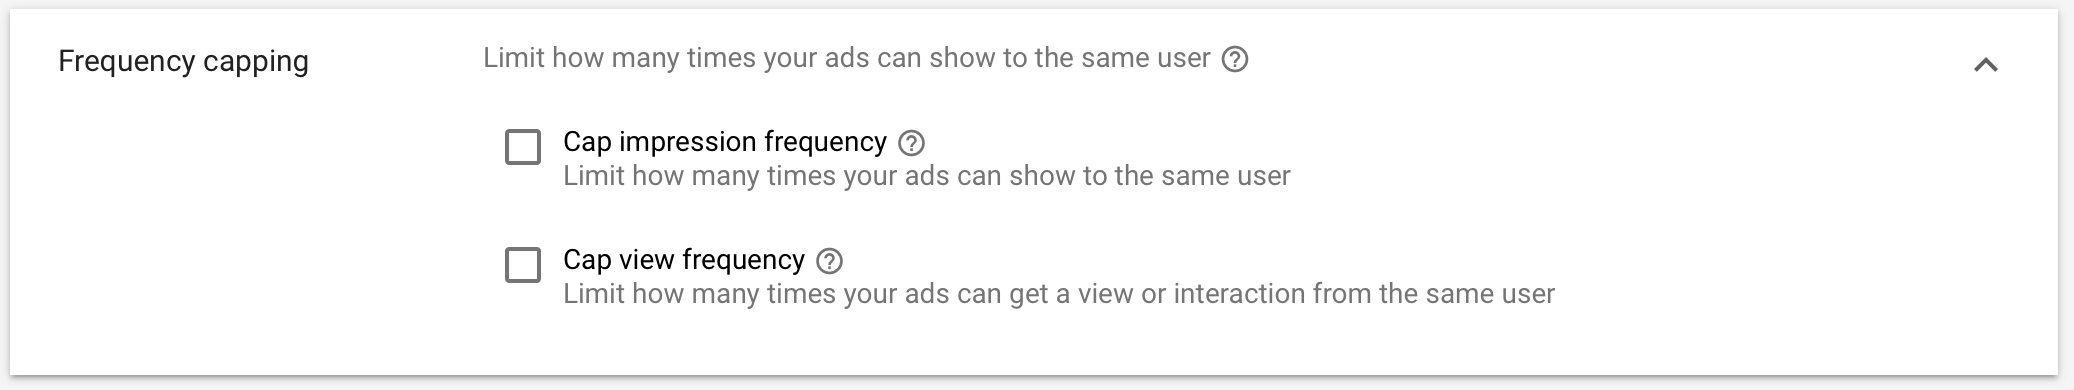 Frequency Capping in Google Ads